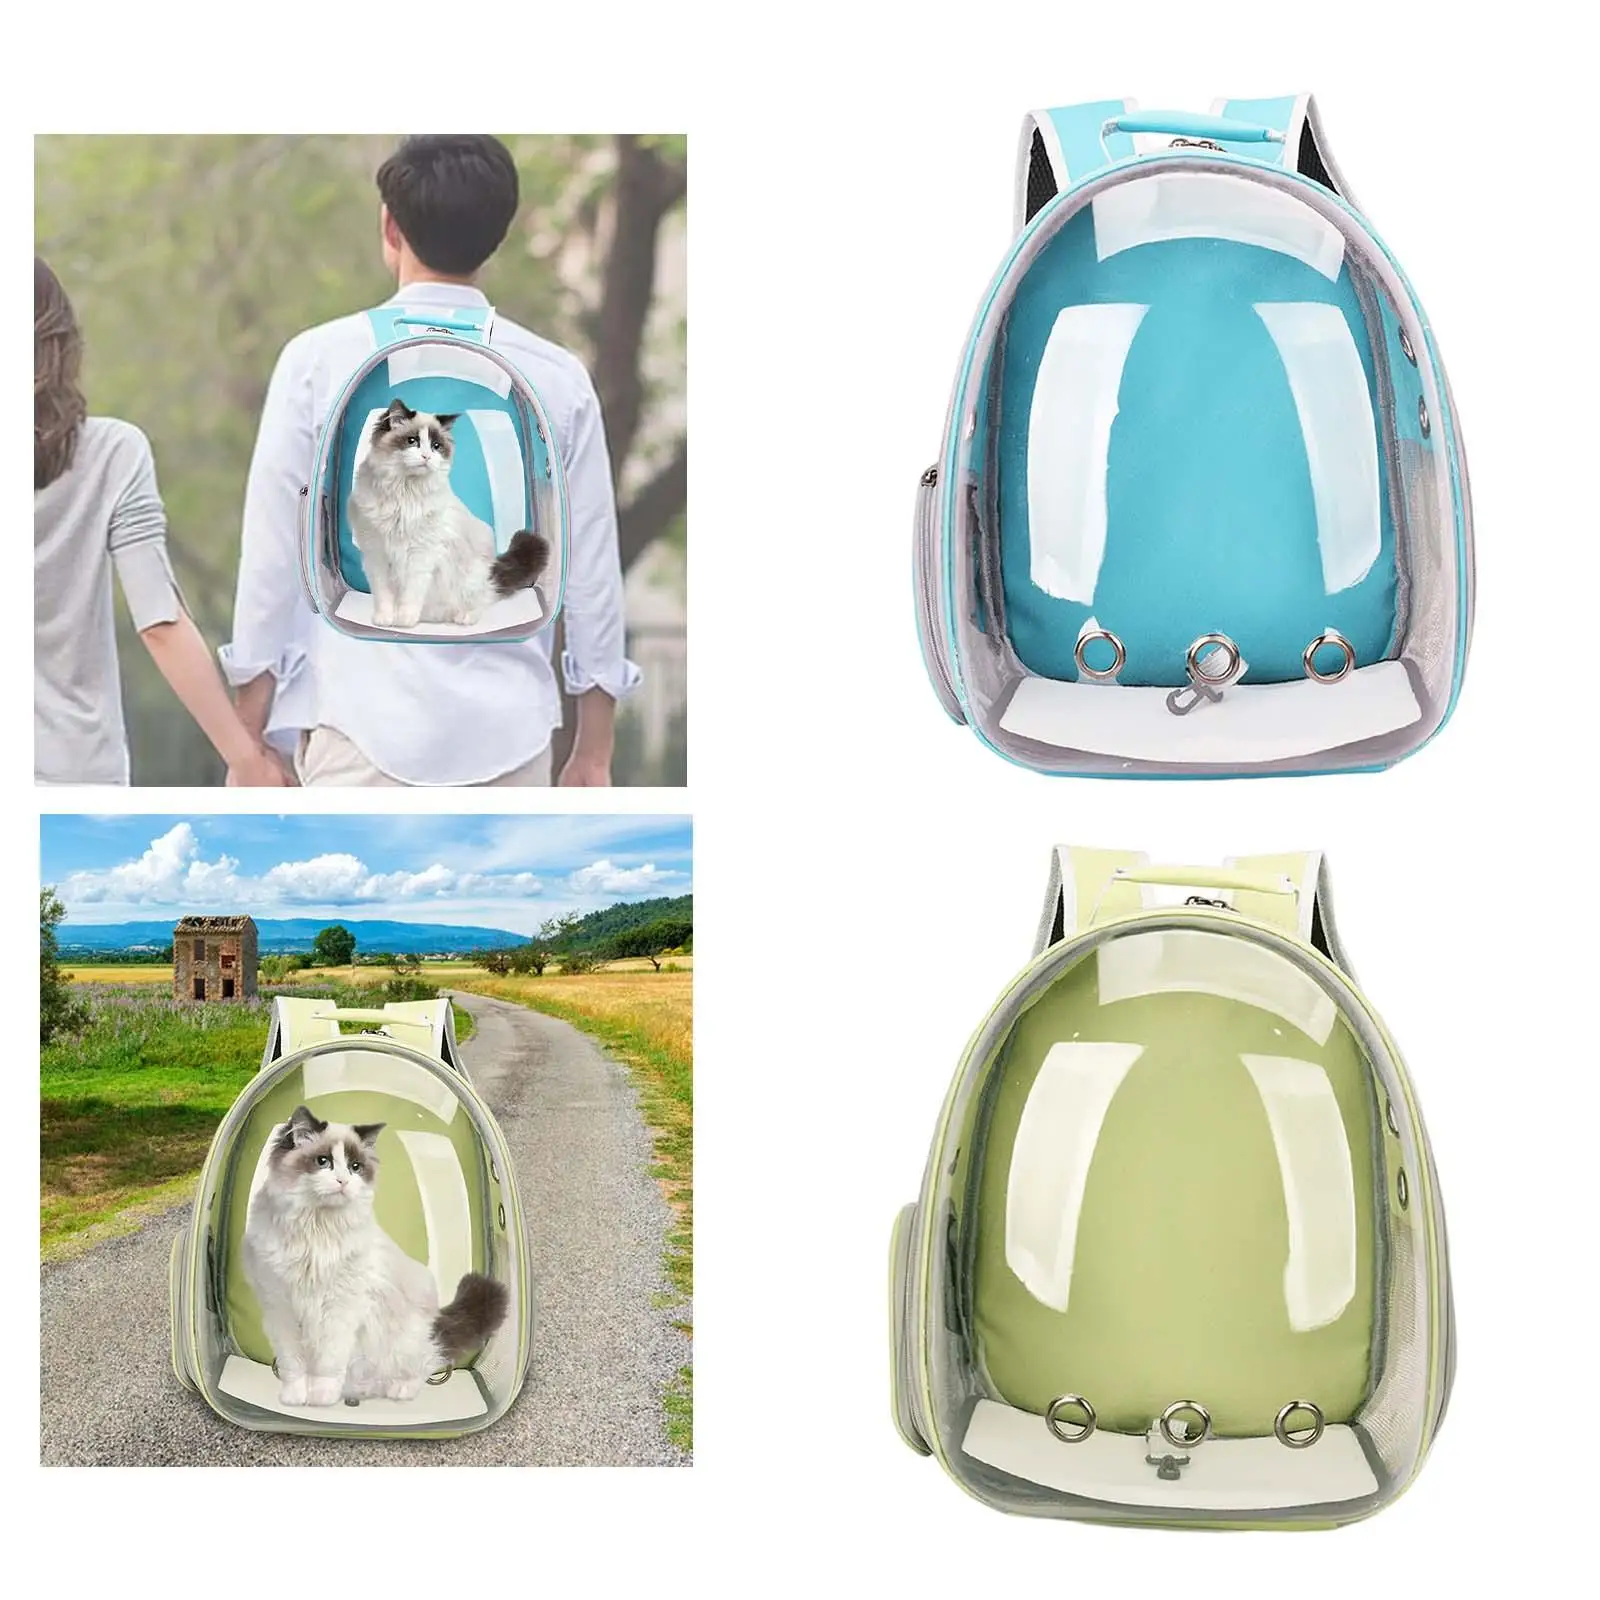 Cat Carrier Backpack Portable Comfortable Small Dogs Cats Travel Carrier Small Dog Hiking Backpack for Camping Traveling Outdoor